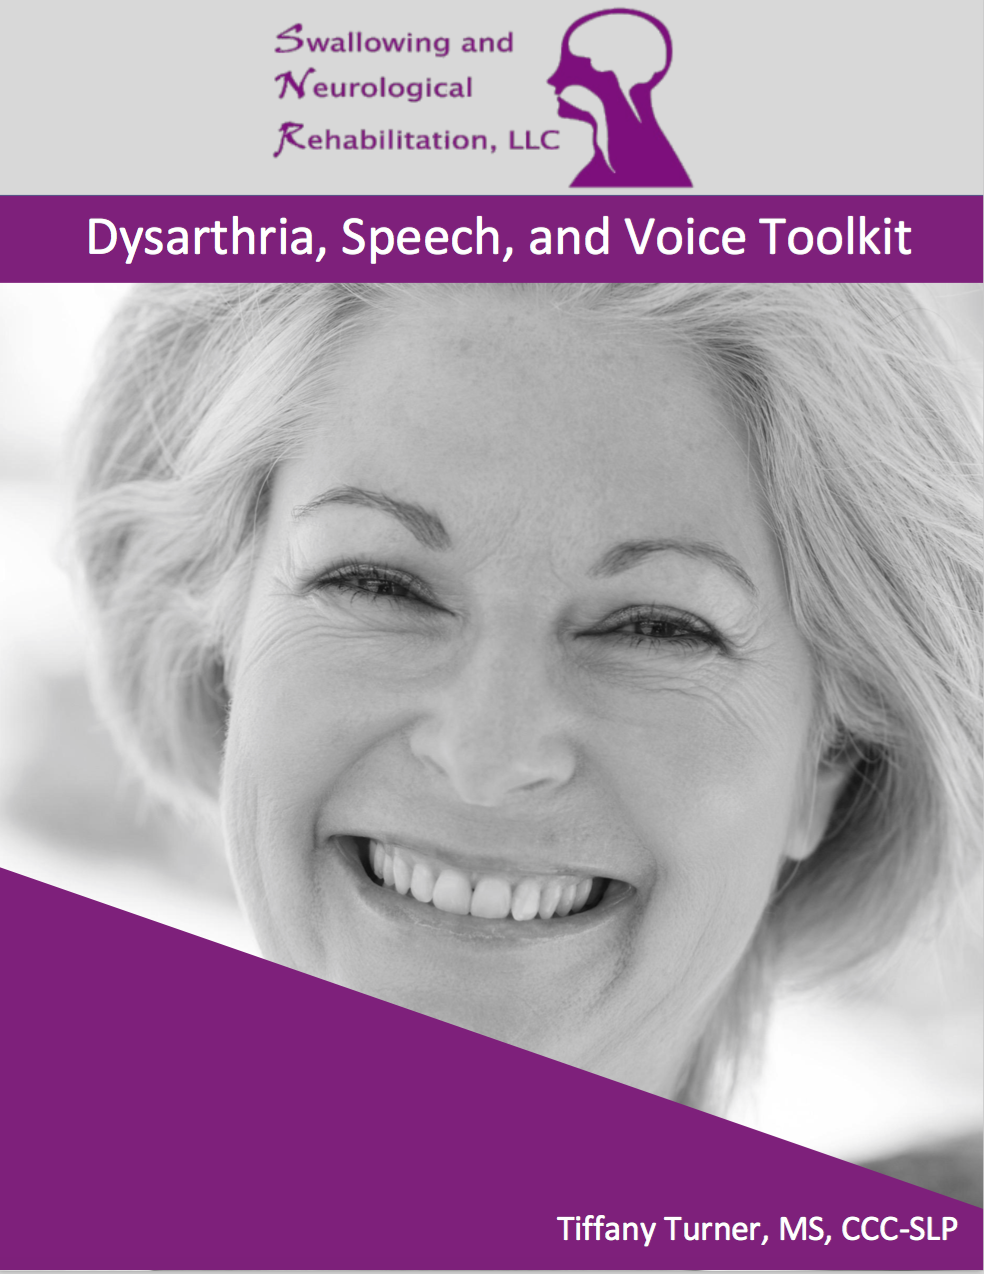 Dysarthria, Speech, and Voice Toolkit